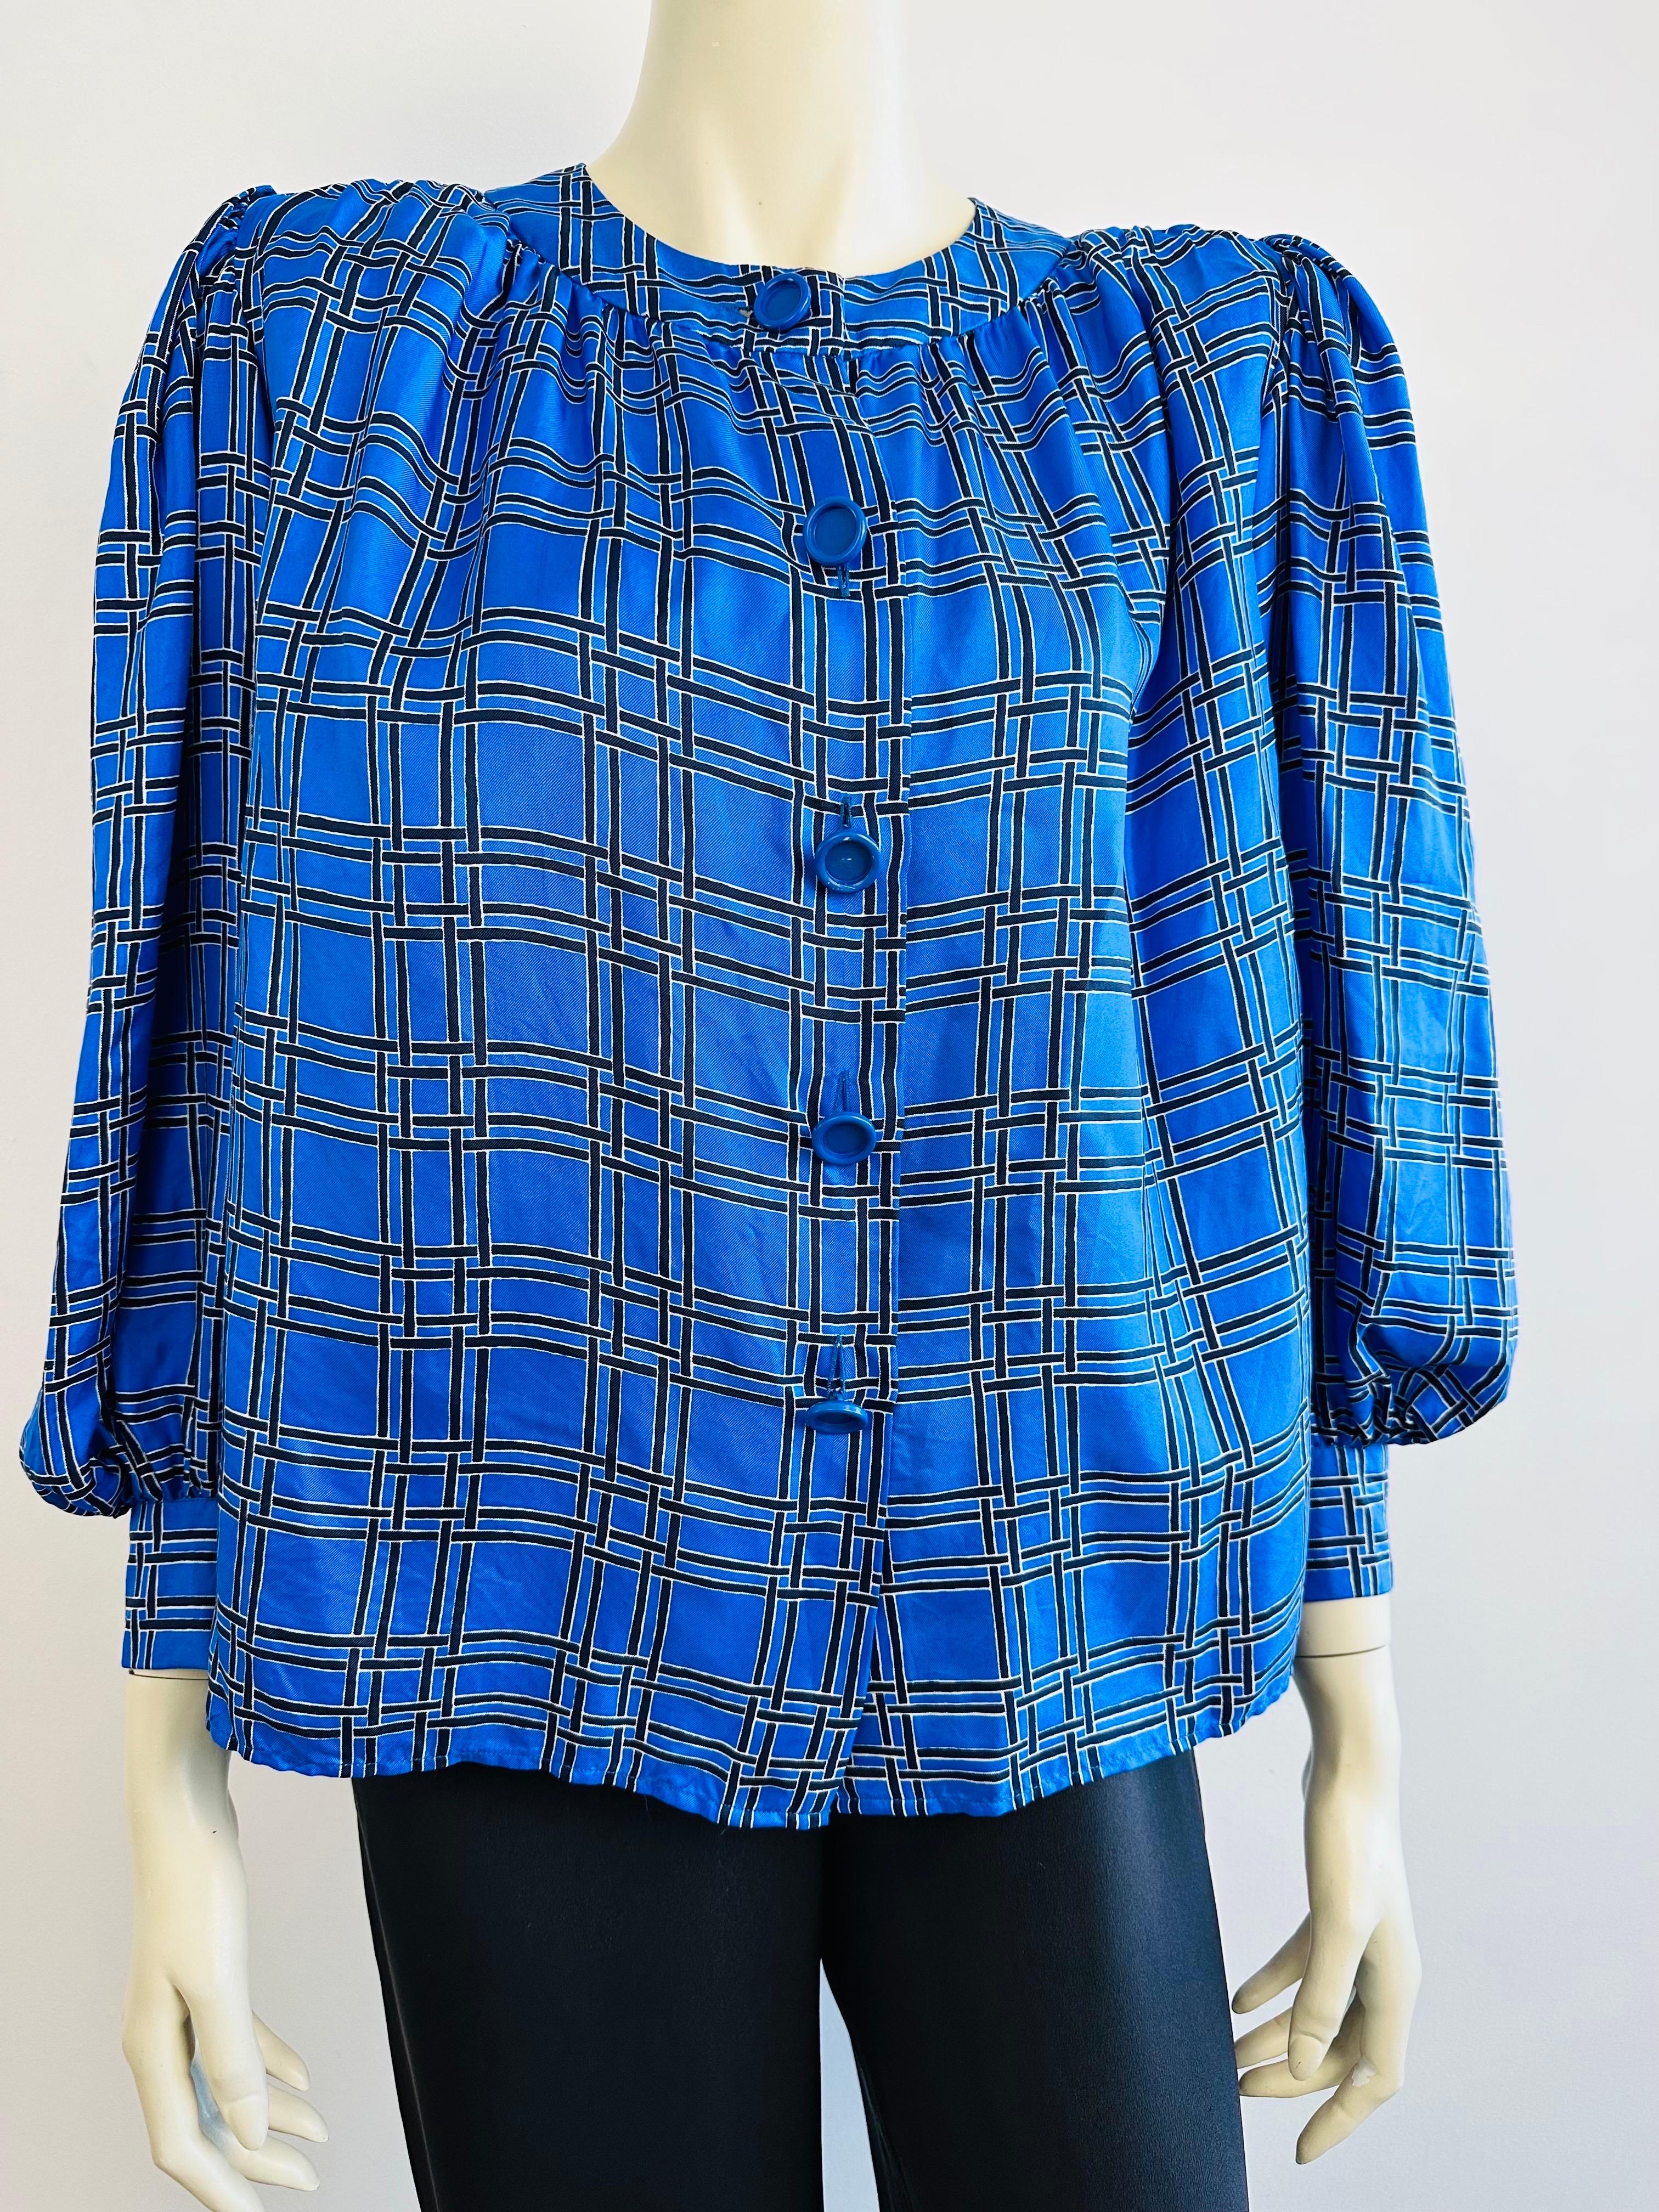 Blue YSL Yves saint Laurent royal blue silk blouse from the 1970s For Sale